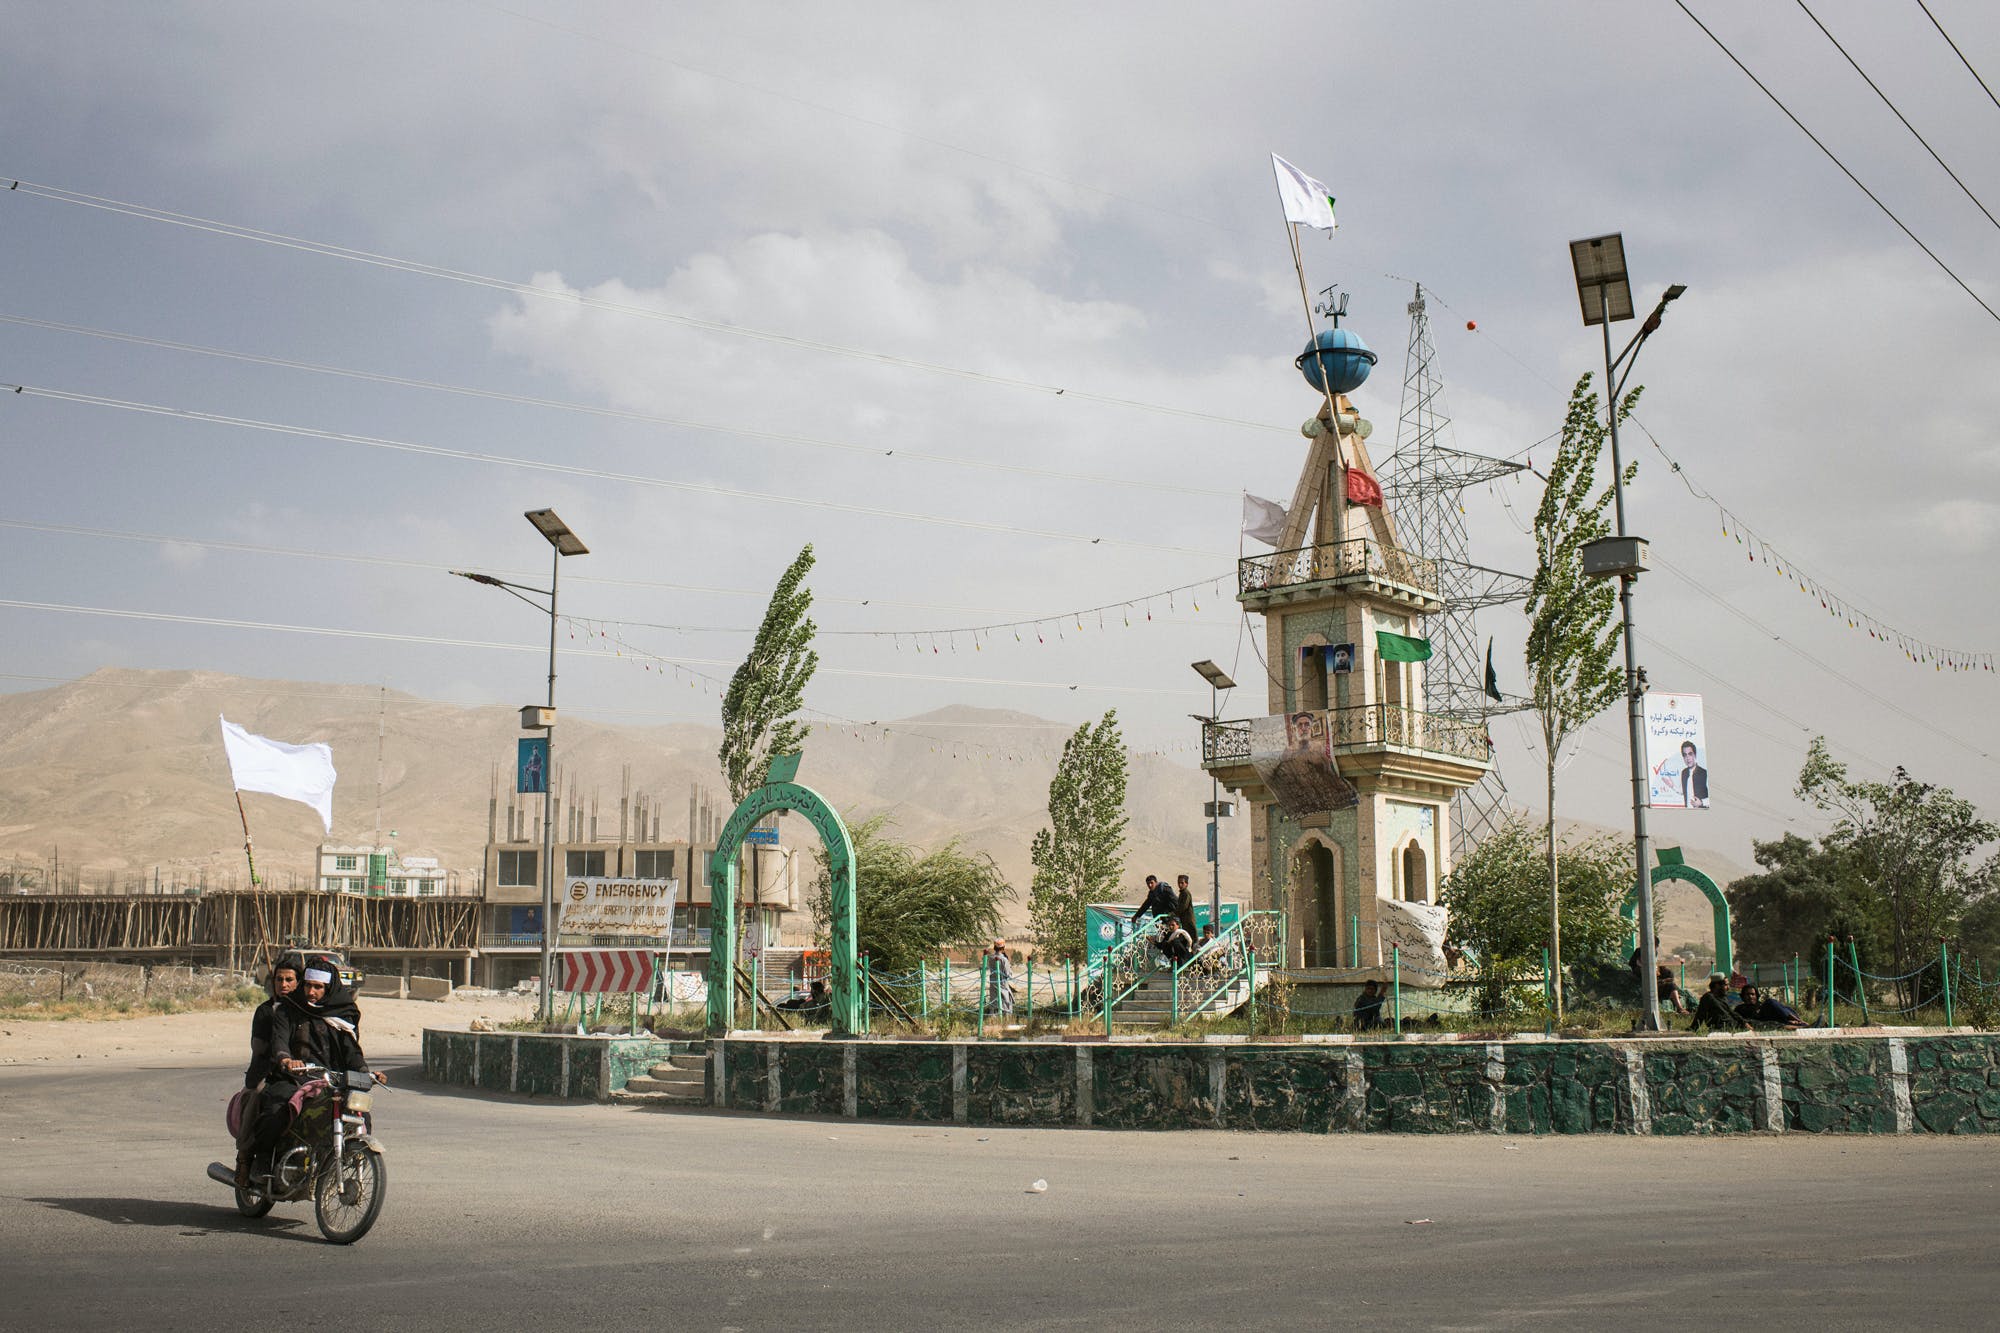 On the third and final day of the first-ever ceasefire between Afghan government and Taliban forces in June 2018, the main traffic roundabout in Wardak’s capital Maidan Shahr was topped with a white Taliban flag. The ceasefire saw Afghan security forces and Taliban insurgents crossing into territory under the other group’s control and embracing in the streets. Afterward, the war resumed as if it had never stopped. 